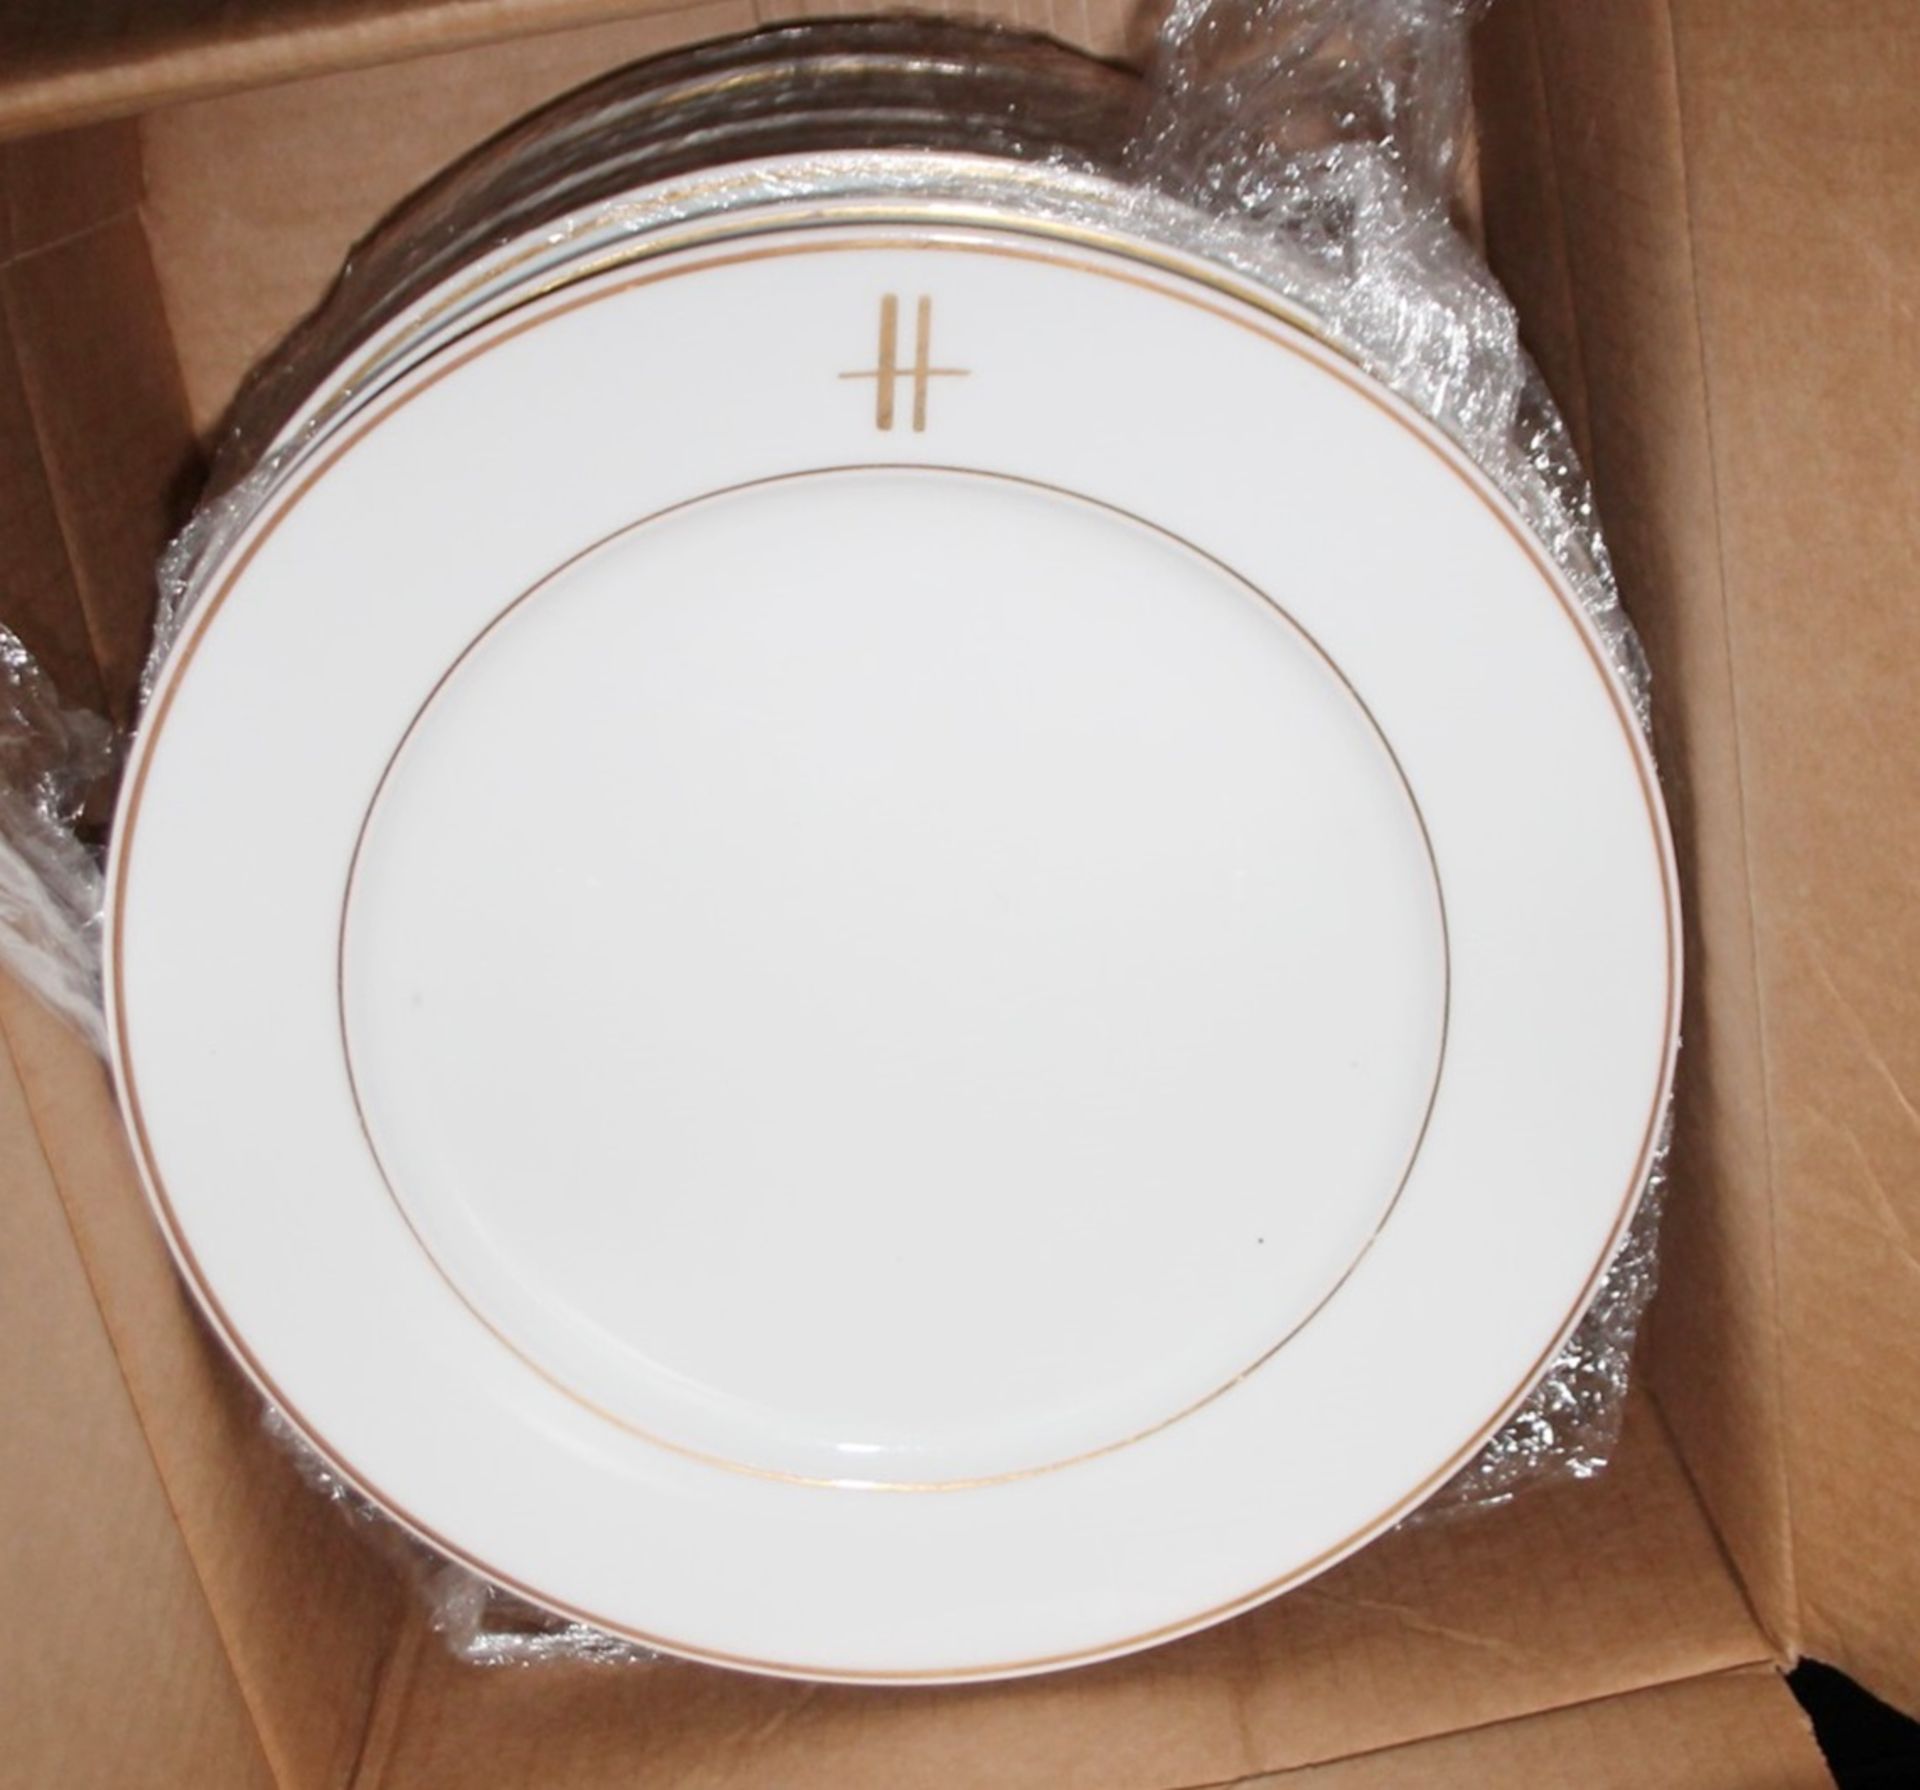 36 x PILLIVUYT Large Dinner Charger Plates In White Featuring 'Famous Branding' In Gold - - Image 5 of 5